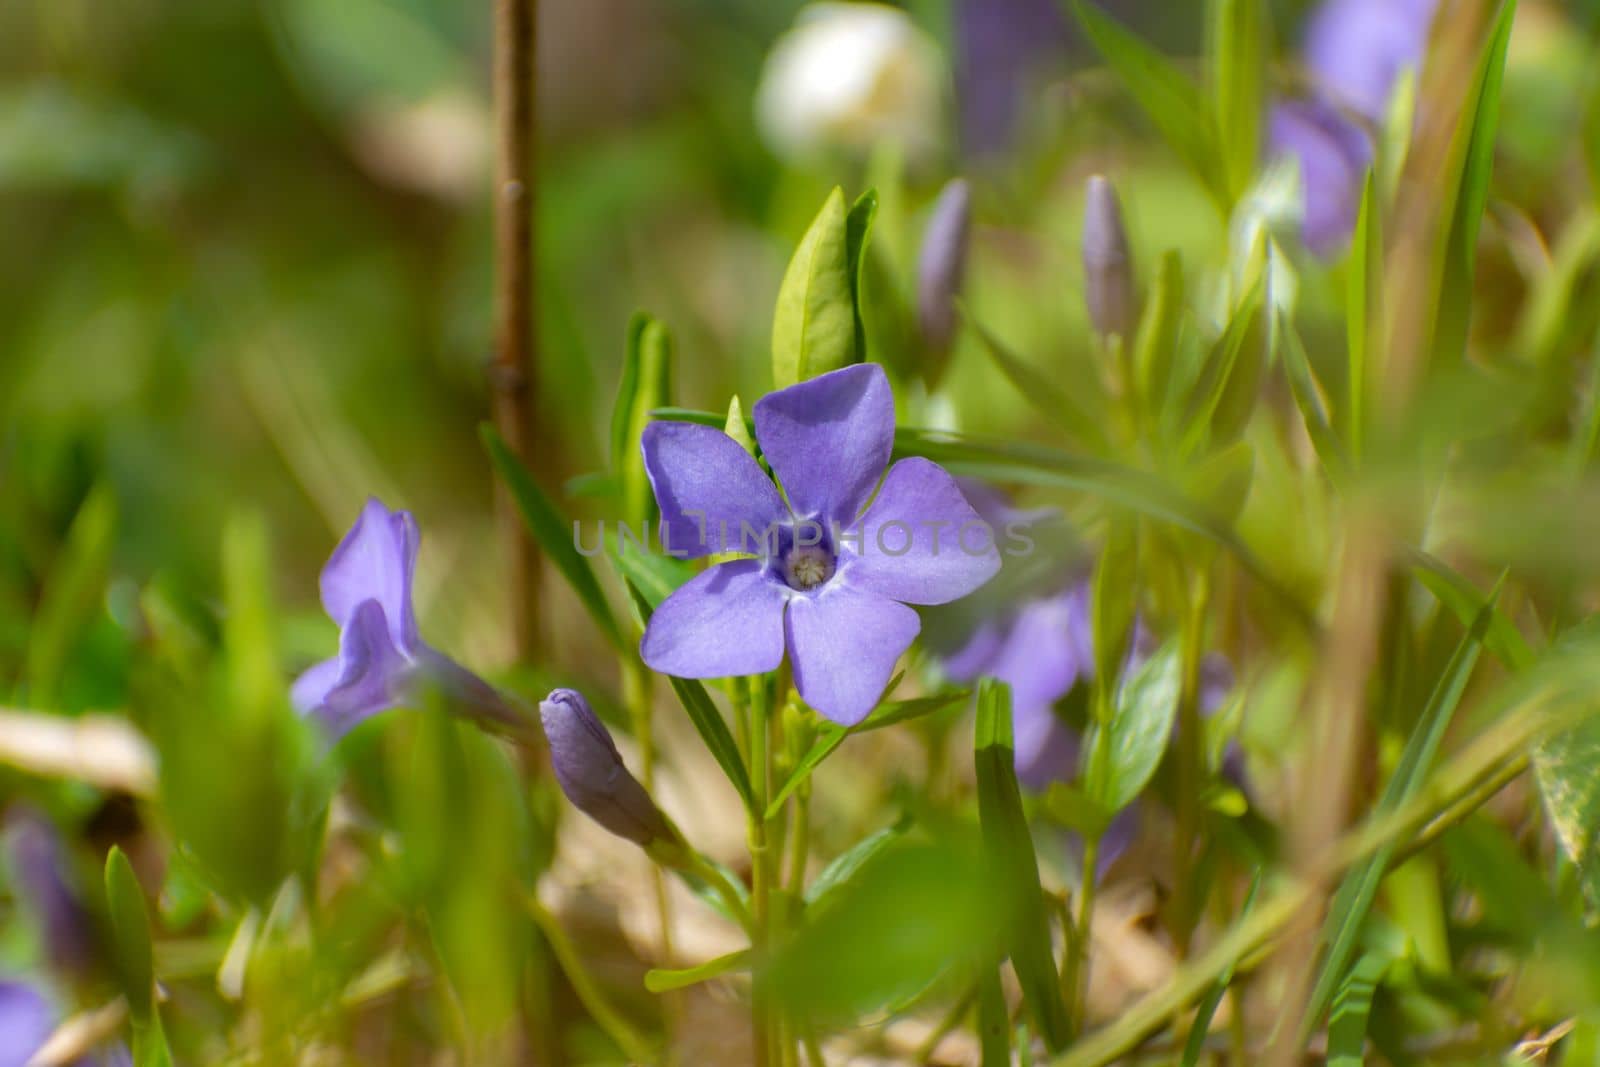 Periwinkle flower and buds in lush grass by darekb22